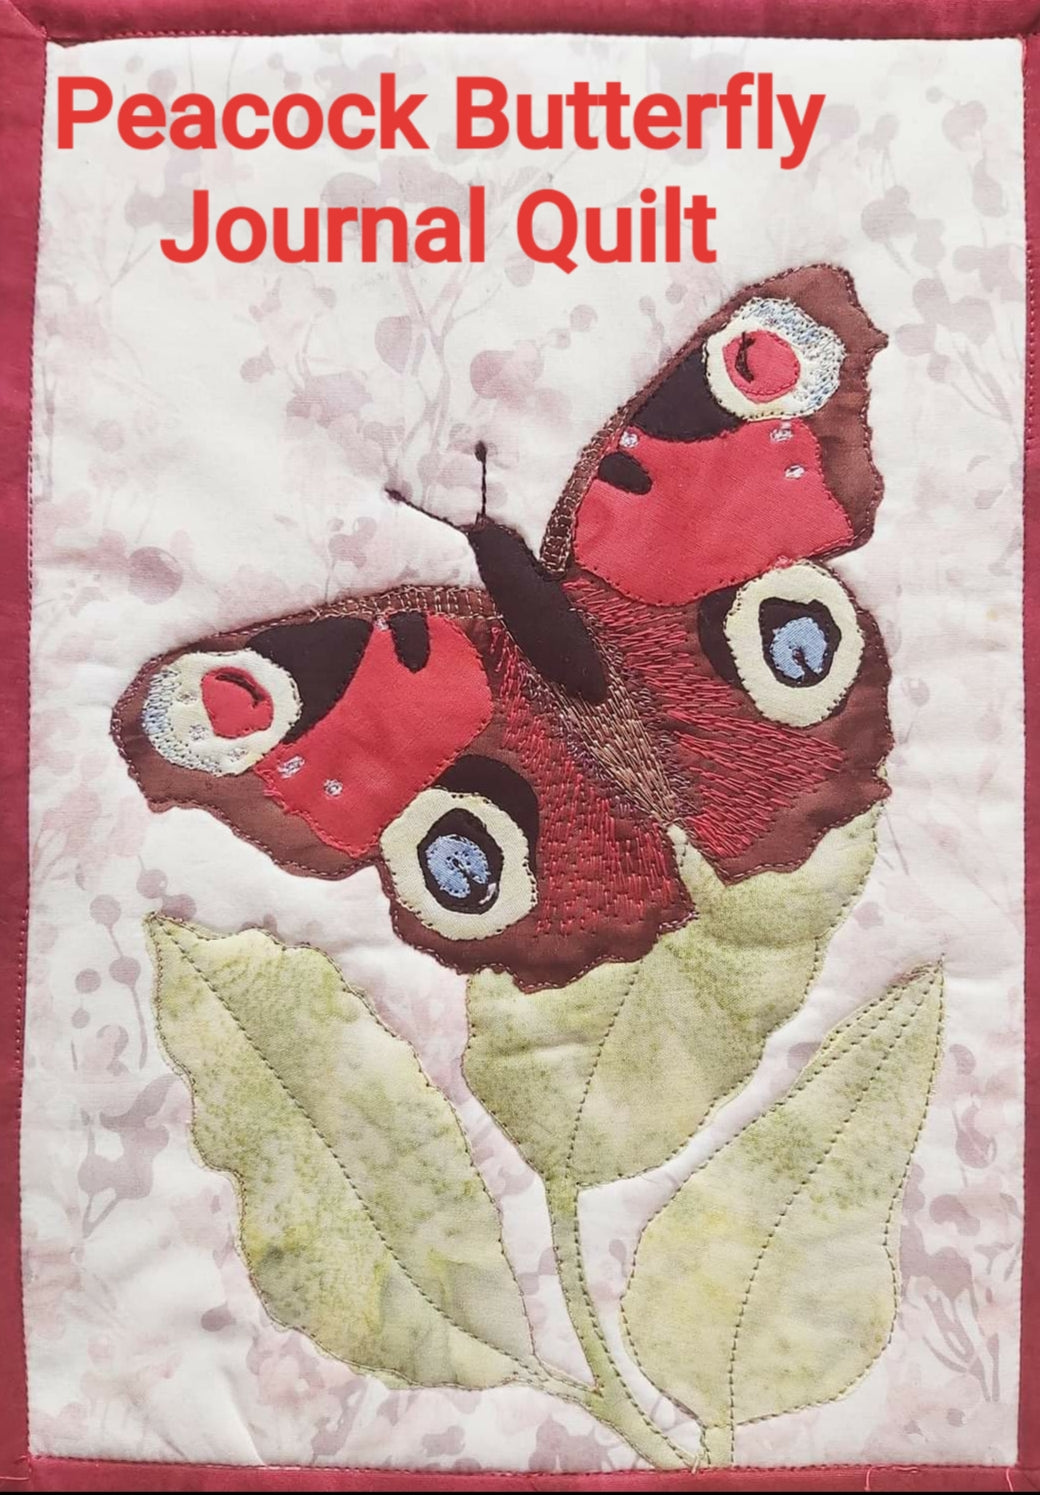 Peacock Butterfly Journal Quilt Kit or Pattern